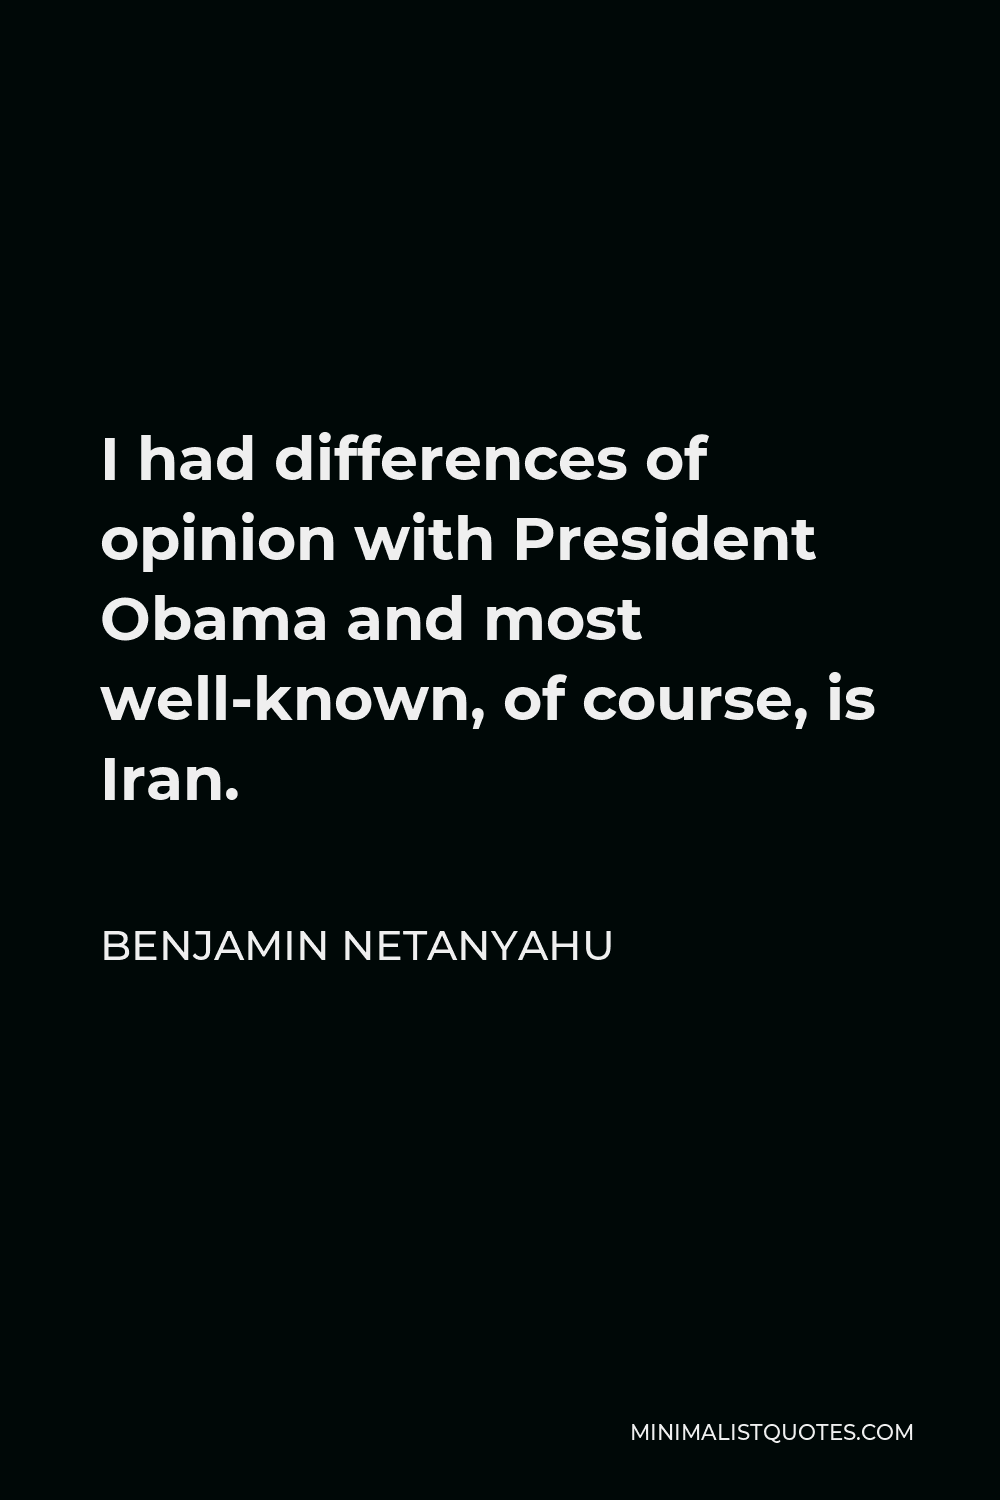 Benjamin Netanyahu Quote - I had differences of opinion with President Obama and most well-known, of course, is Iran.